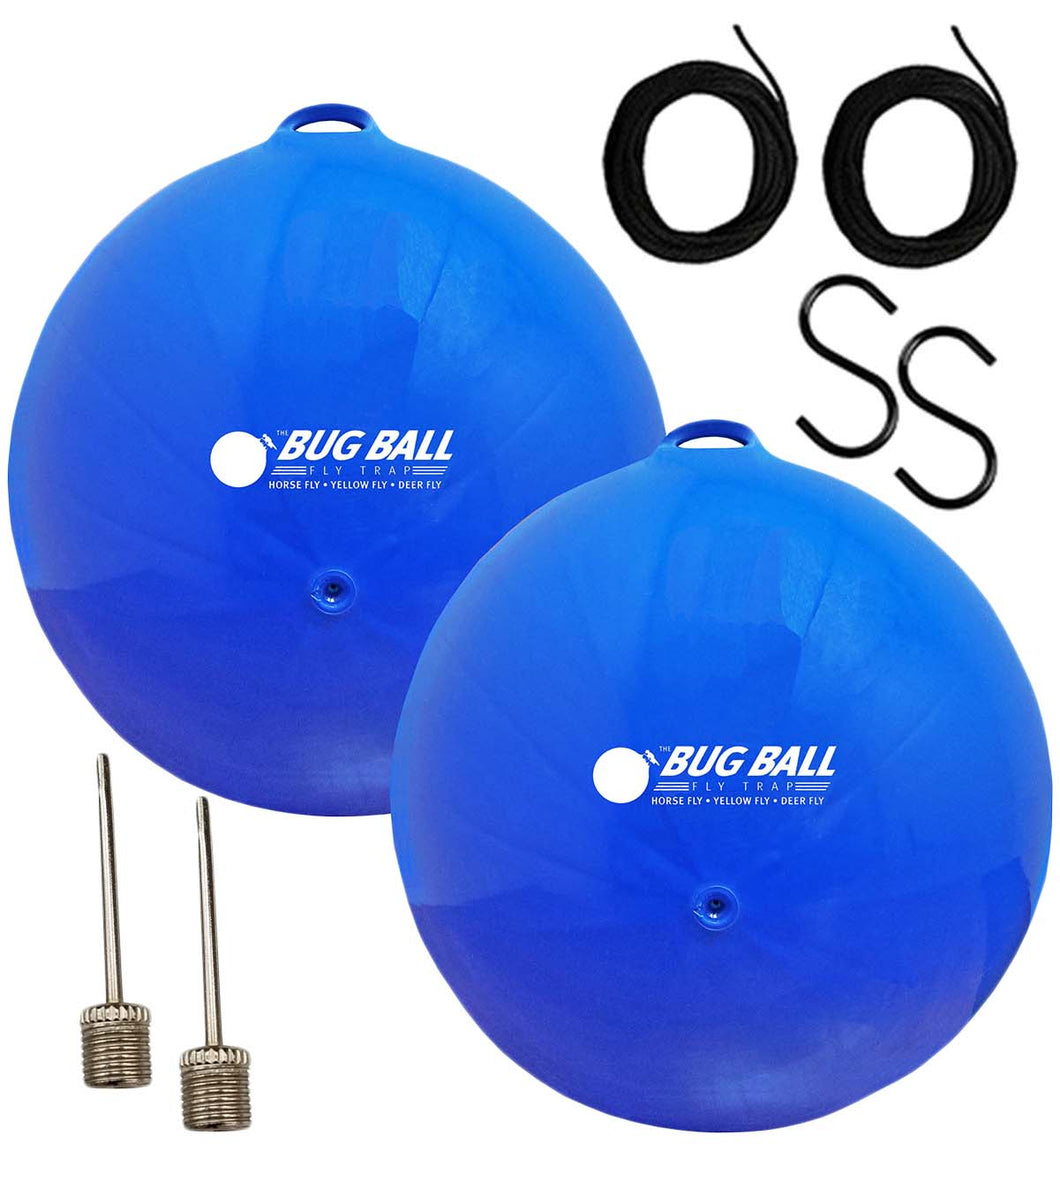 Wholesale of Deer Fly Ball Replacement Ball, 2 Pack